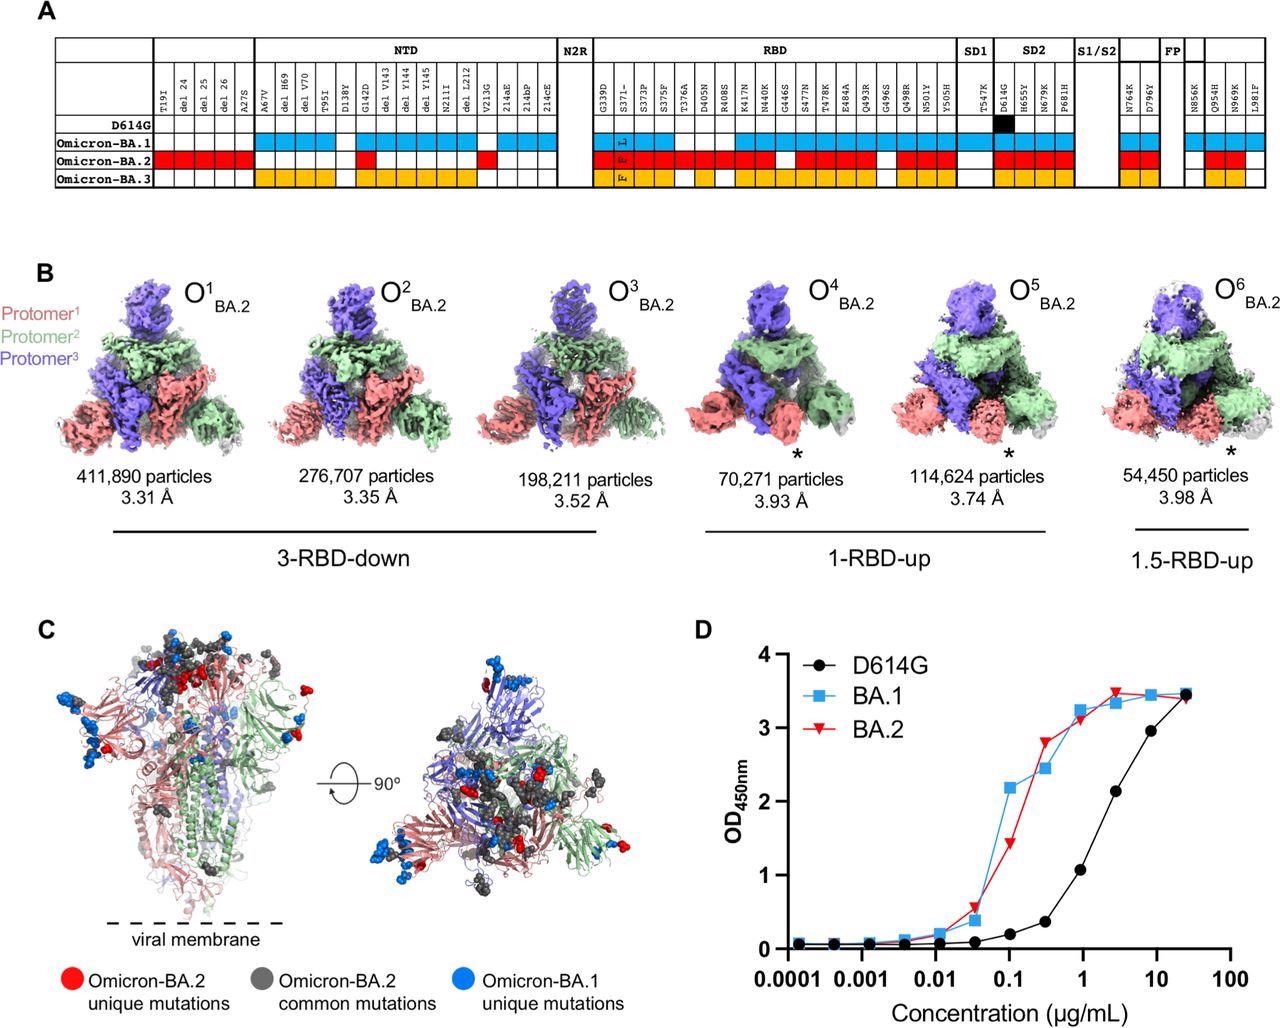 Structural characterization of SARS-CoV-2 Omicron-BA.2 spike (S) protein. ​​​​​​​A. Comparison of residue changes in the S protein ectodomain (S-GSAS) of SARS-CoV-2 D614G and Omicron variants. Residue changes from the original Wuhan strain are color-coded for the variants: D614G (black), BA.1 (blue), BA.2 (red), and BA.3 (yellow). B. Cryo-EM reconstructions of Omicron-BA.2 S protein 3-RBD-down (O1BA.2: EMD-26433, PDB 7UB0; O2BA.2: EMD-26435, PDB 7UB5; O3BA.2: EMD-26436, PDB 7UB6), 1-RBD-up (O4BA.2, O5BA.2), and 1.5-RBD-up (O6BA.2) states, colored by protomer, and viewed from the host cell membrane. In the 1-RBD-up reconstructions, the “up” RBD is indicated by an asterisk (*). C. Omicron-BA.2 spike 3- RBD-down (O1BA.2: EMD-26433, PDB 7UB0) structure colored by protomer, with common mutations shown by gray spheres, BA.2 unique mutations in red, and BA.1 unique mutations blue. D. ACE-2 binding to SARS-CoV-2 S proteins measured by ELISA.